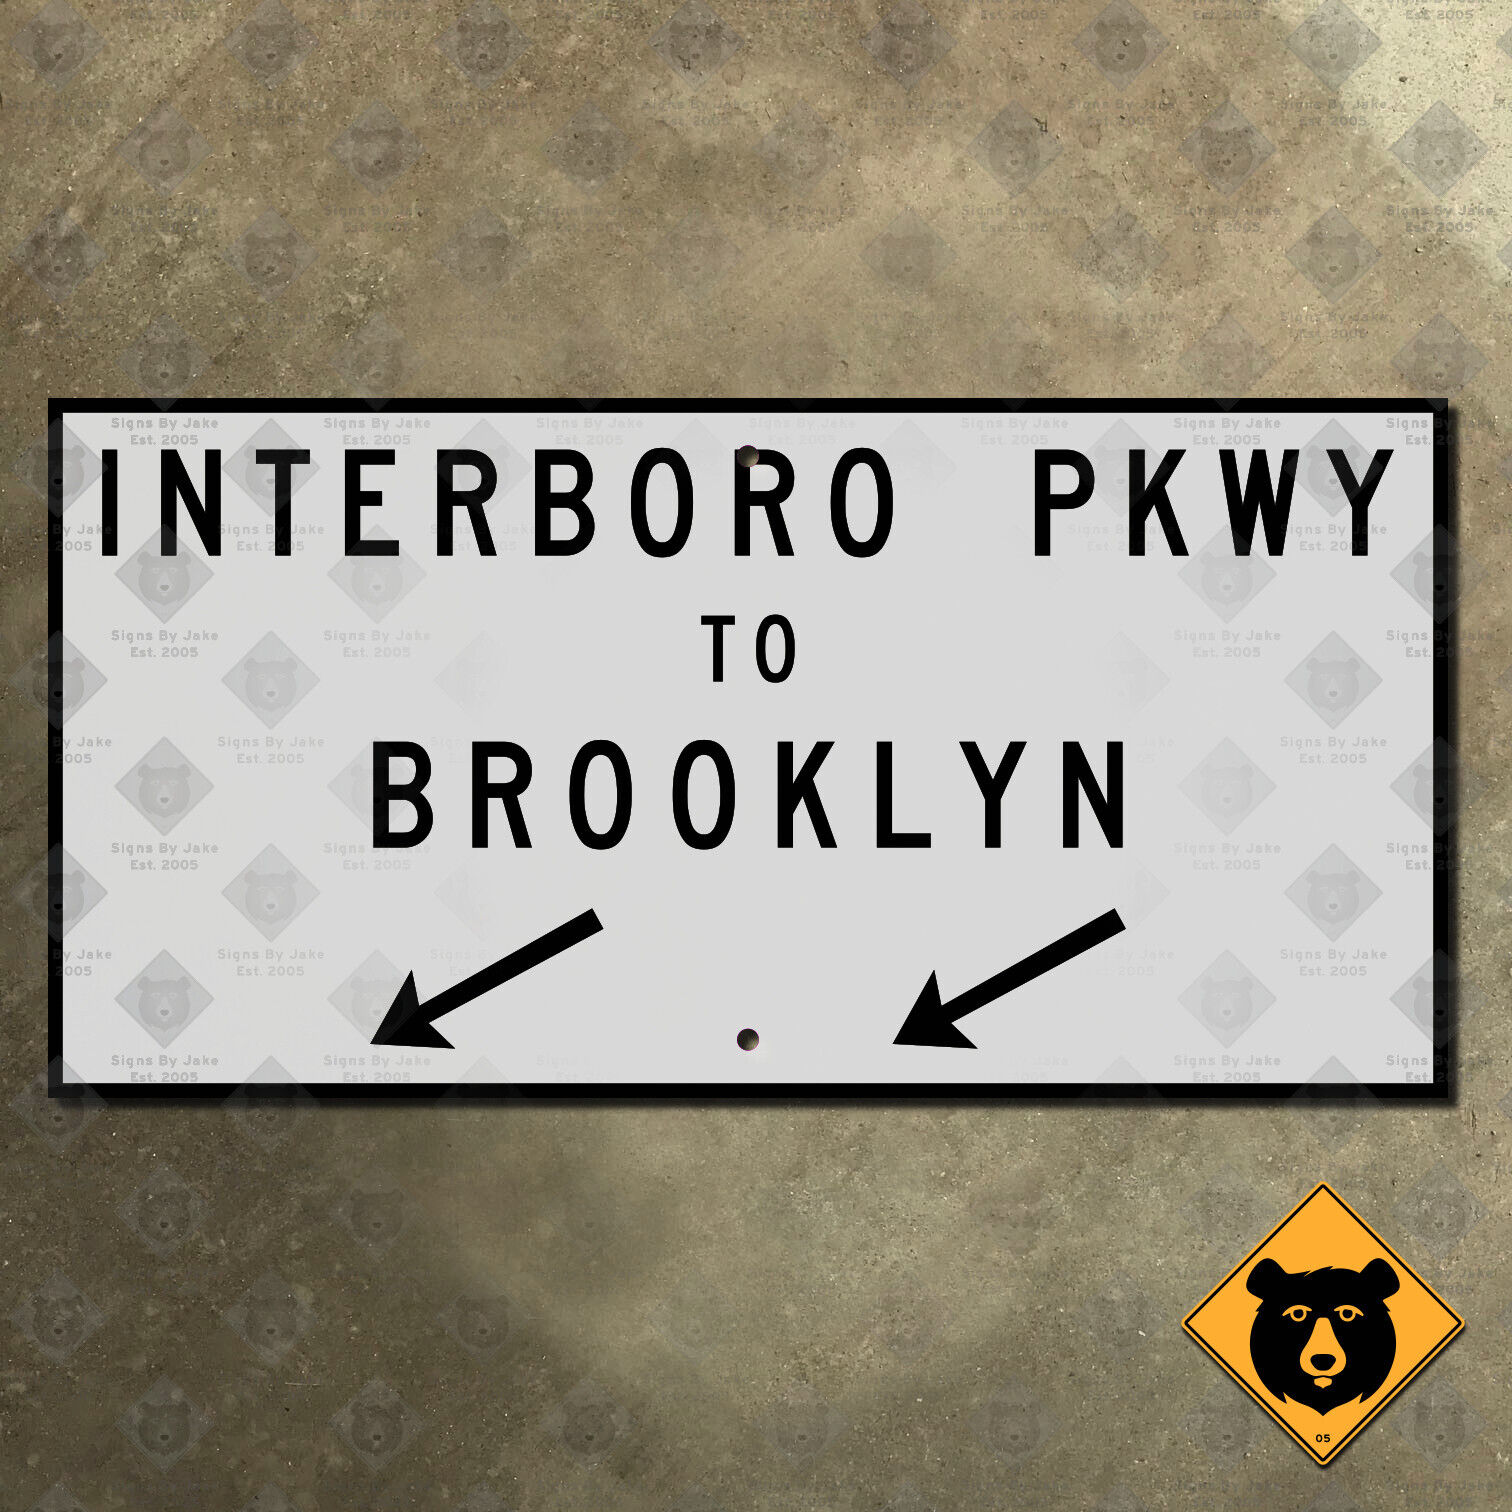 Interboro Parkway to Brooklyn New York highway marker 1952 road sign 24x12